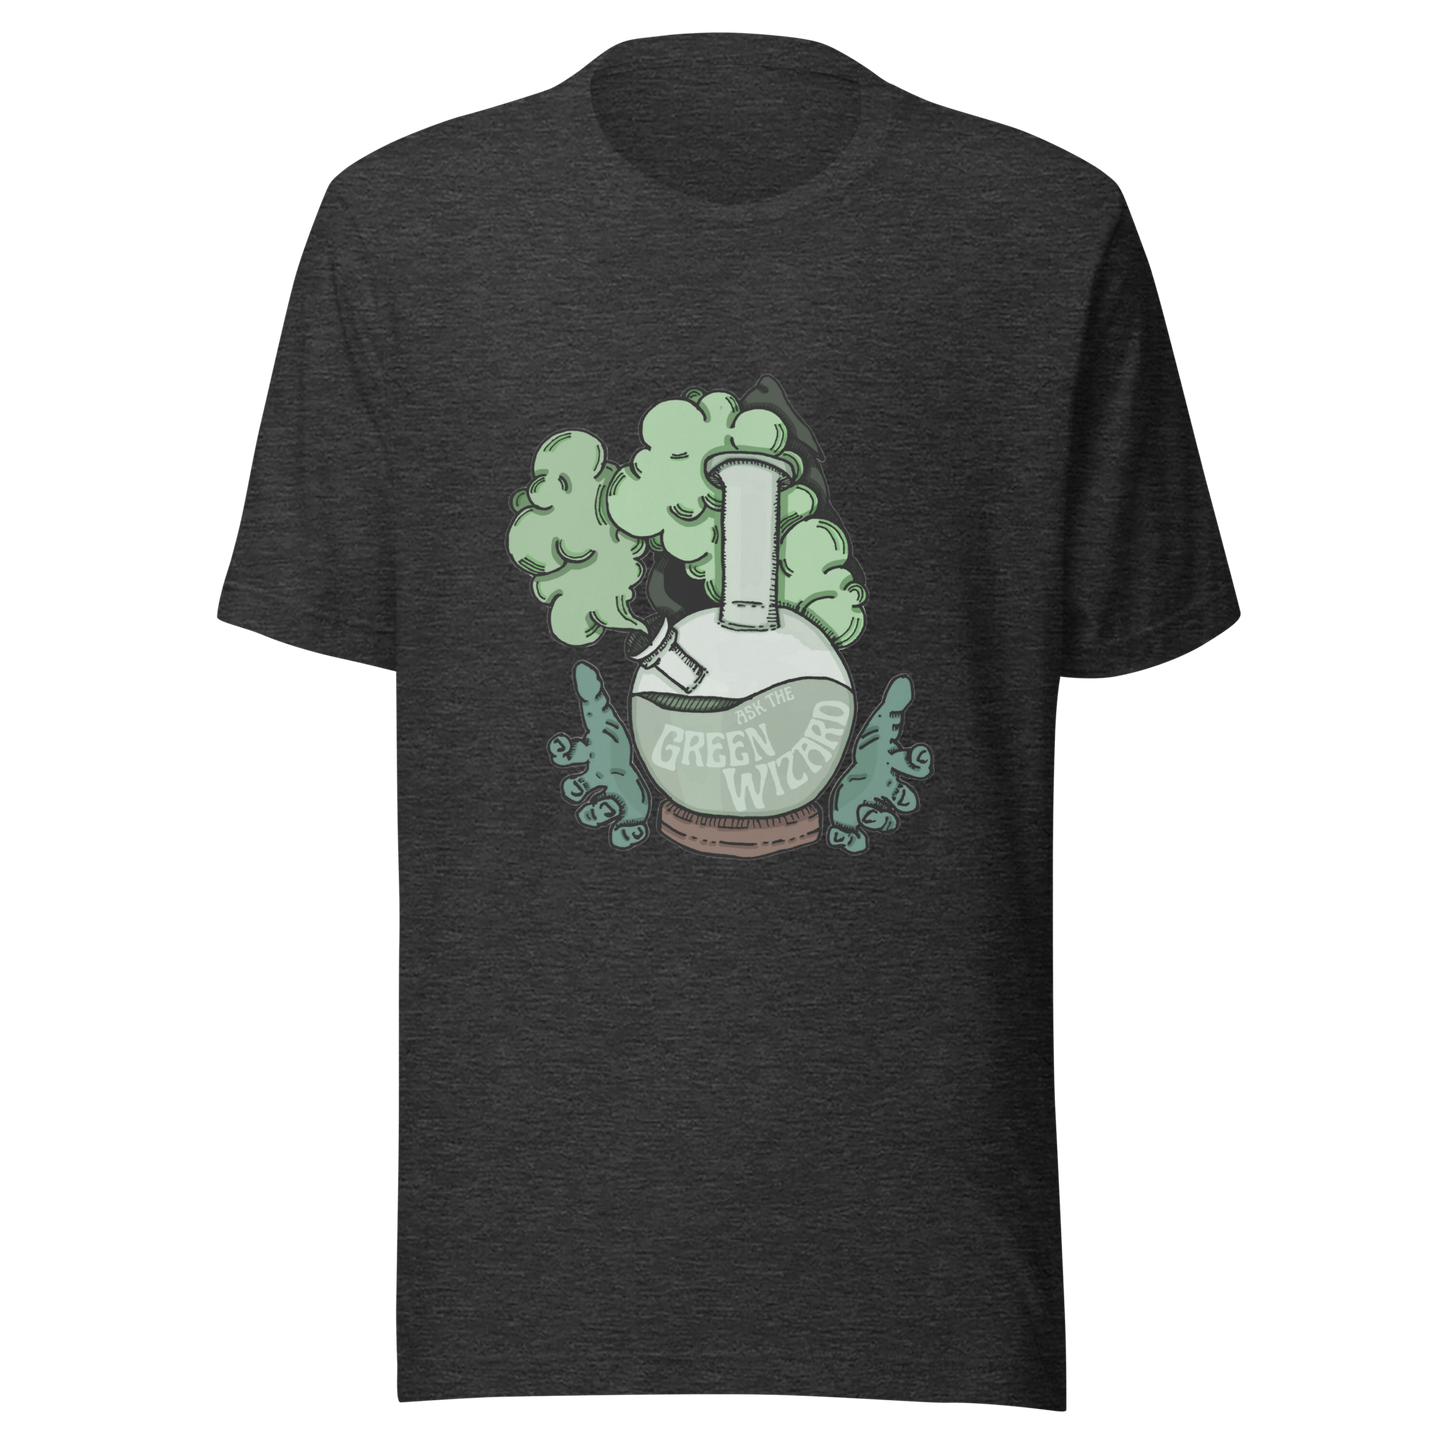 ask the green wizard t-shirt in grey - gaslit apparel